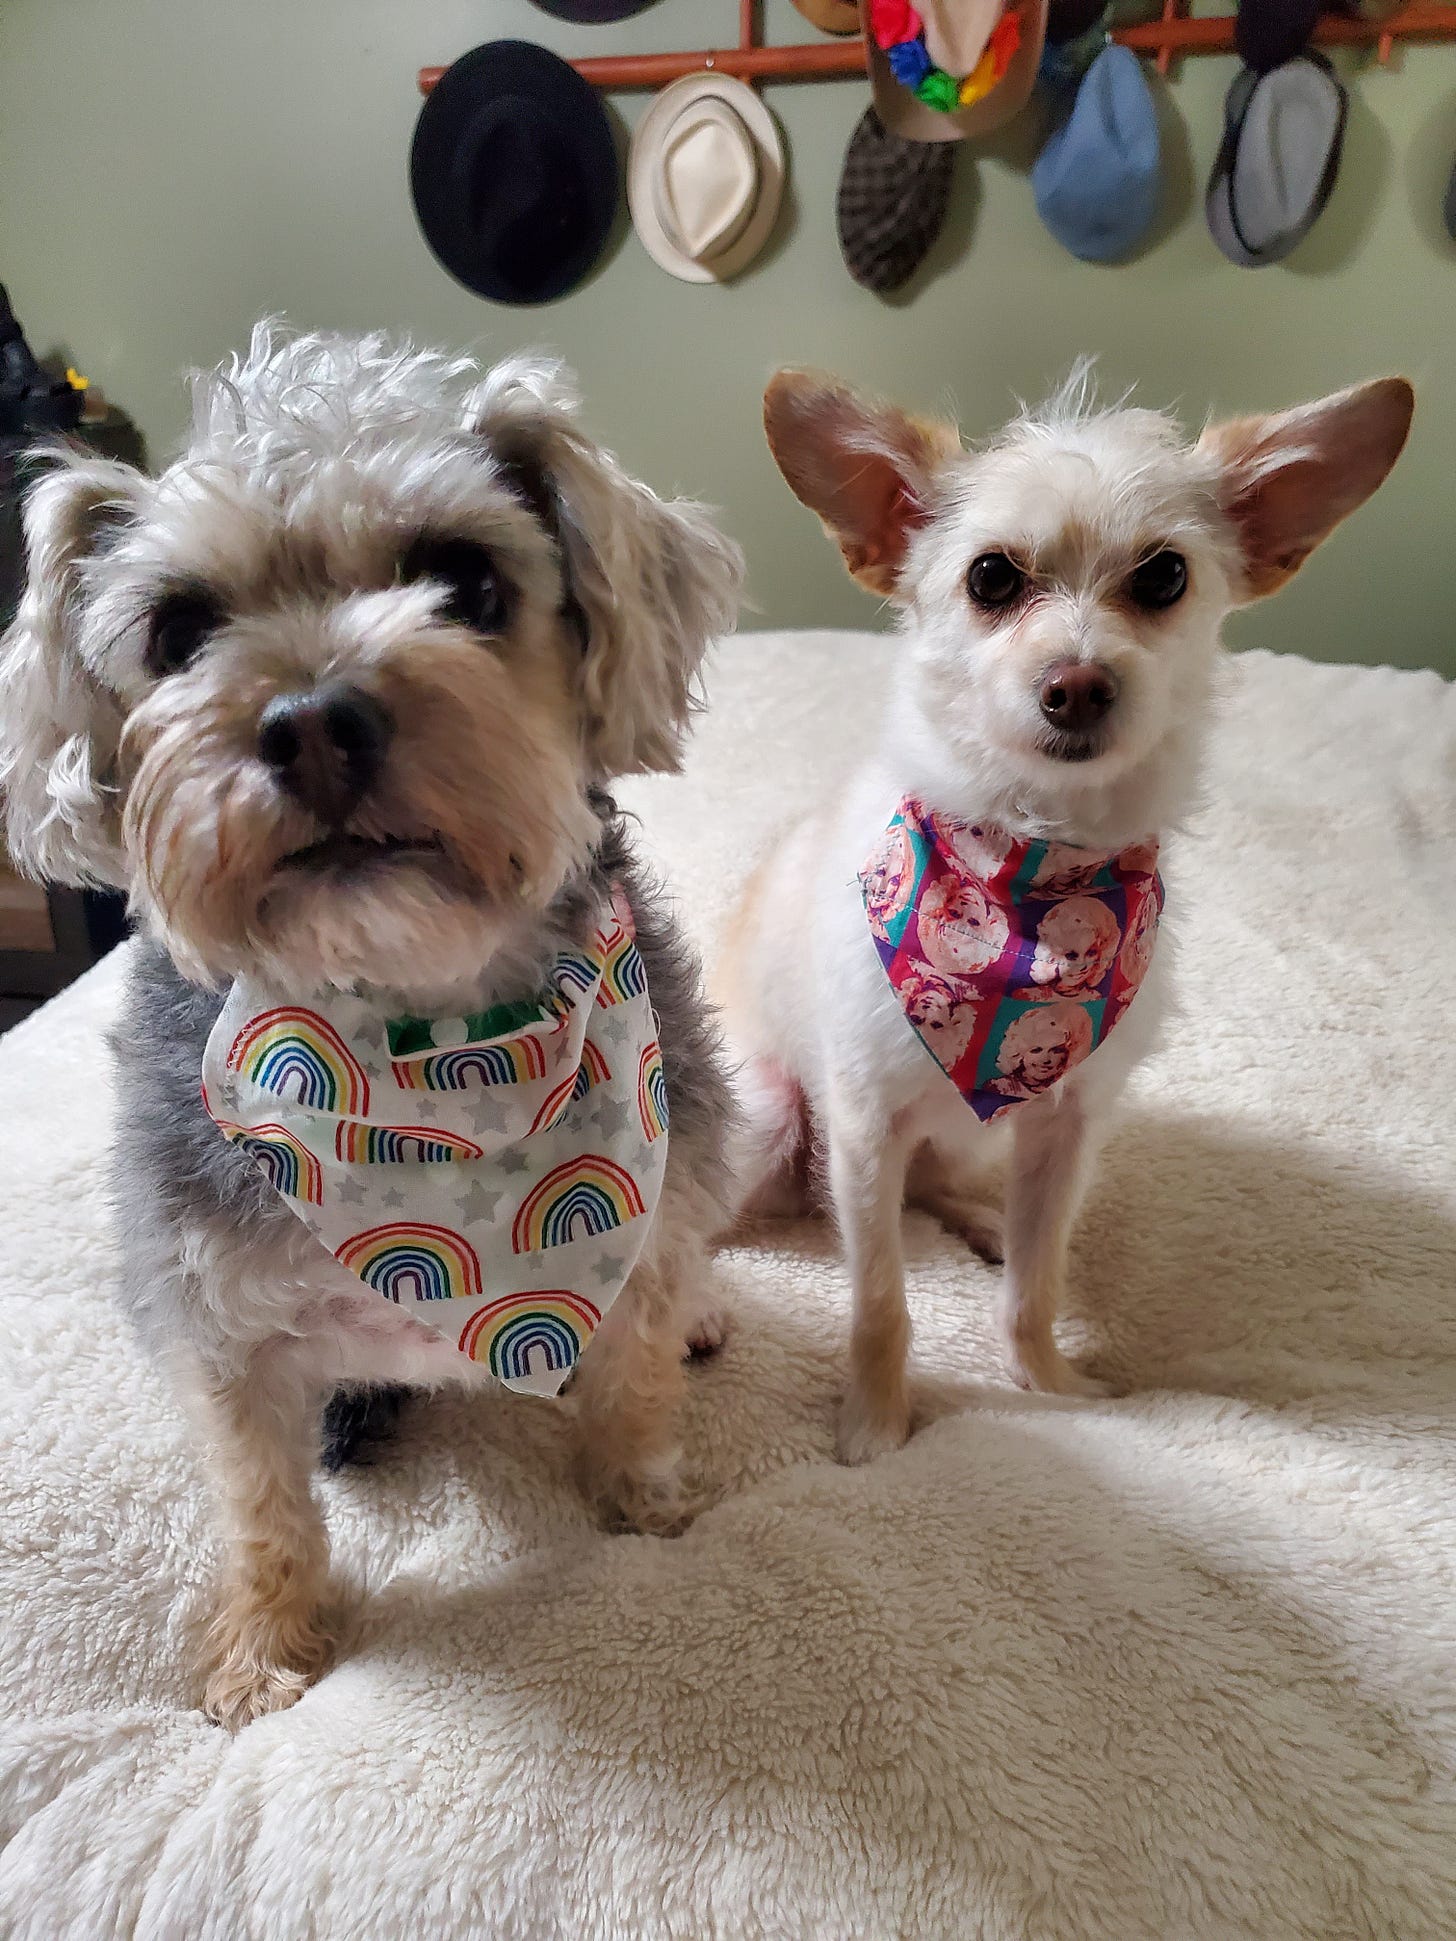 Two small dogs model brightly colored neckerchiefs: Billie Jean is a scruffy, schauzer-looking mutt with silver and gray hair, and her neckerchief has little rainbows on it. Oliver is a big-eared, white-haired mutt and his neckerchief has illustrations of Dolly Parton on it.